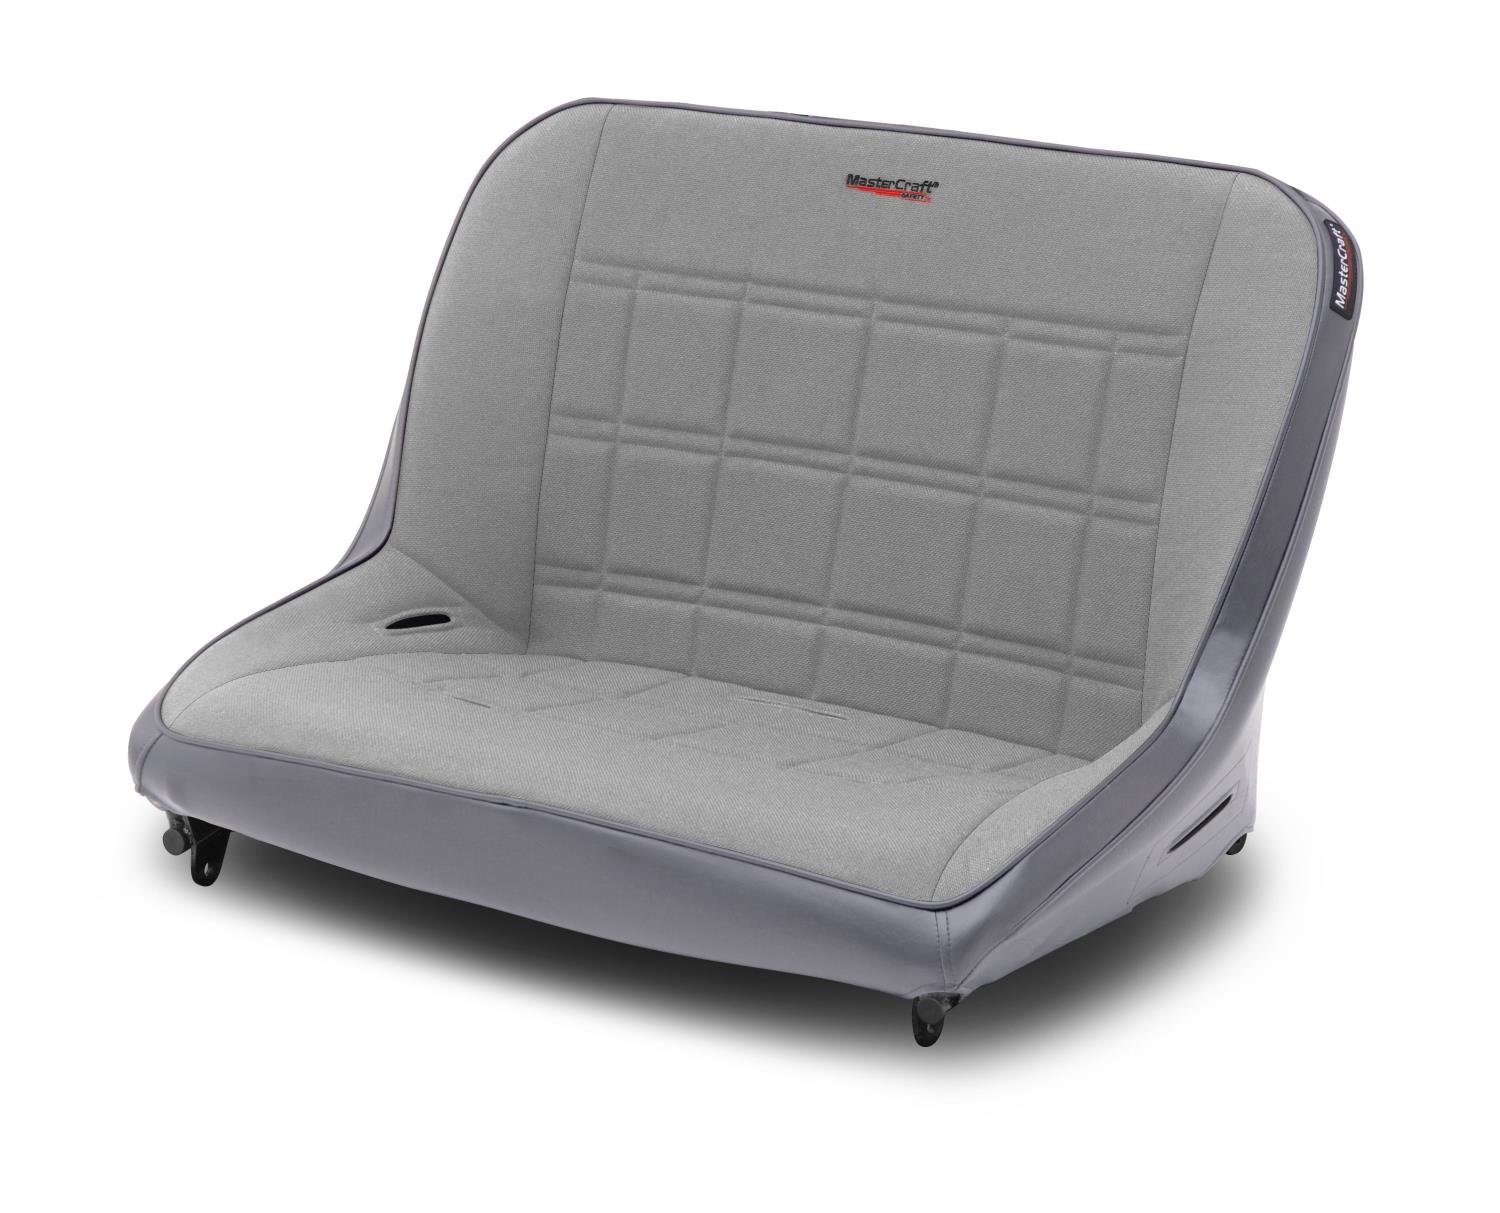 773009 Original 40 in. Shorty Bench with No Headrest, Smoke w/Gray Center & Side Panels, Smoke Piping